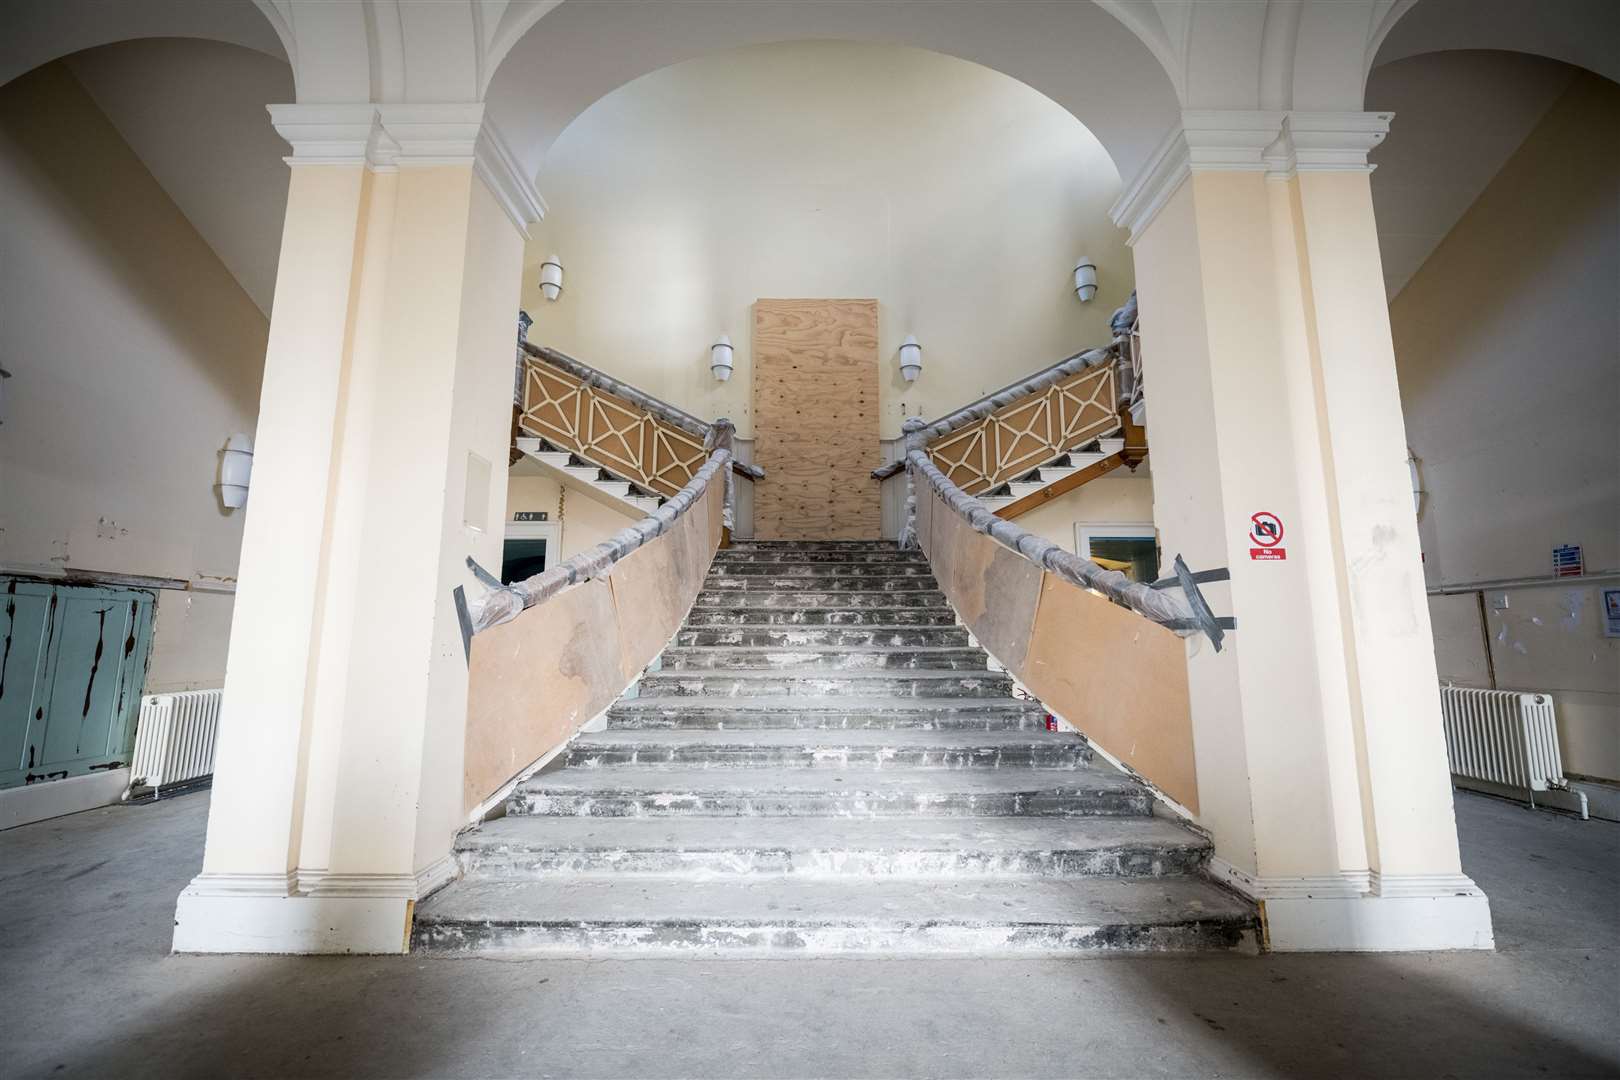 The main staircase at Inverness Castle which is to be transformed into a visitor attraction celebrating the Spirit of the Highlands.